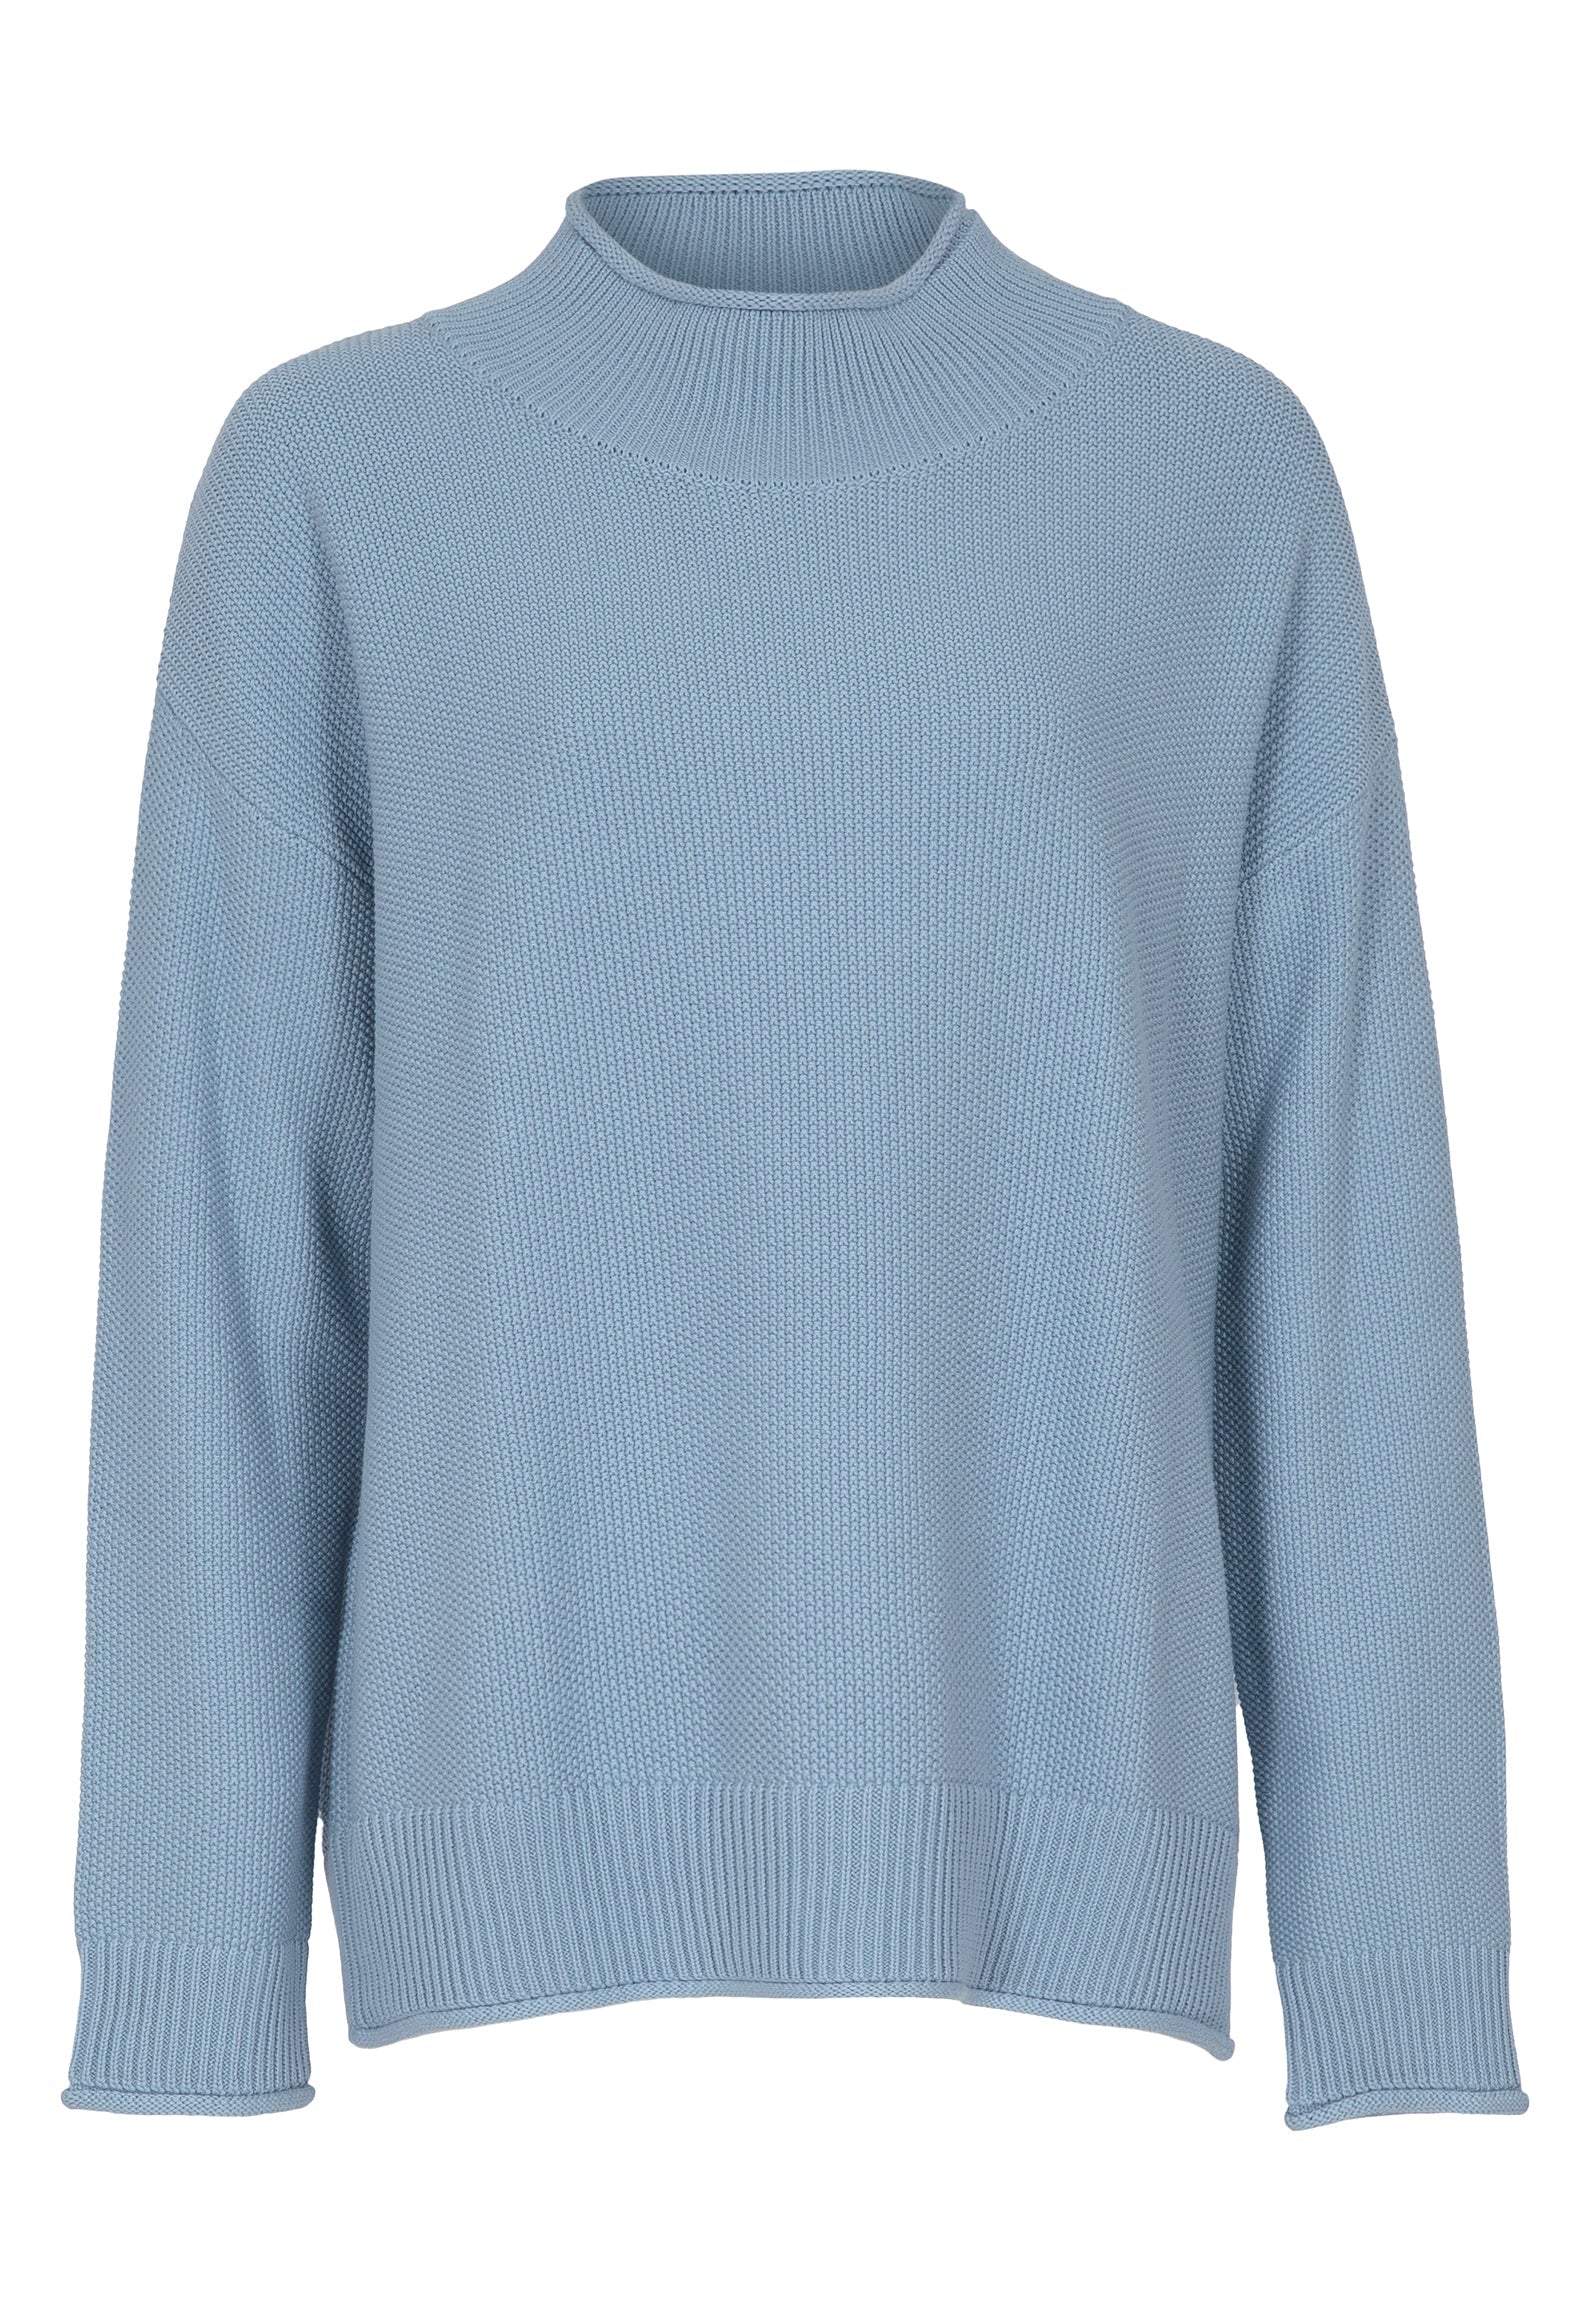 Petra Sweater - Sky Blue-Knitwear & Jumpers-By RIDLEY-The Bay Room